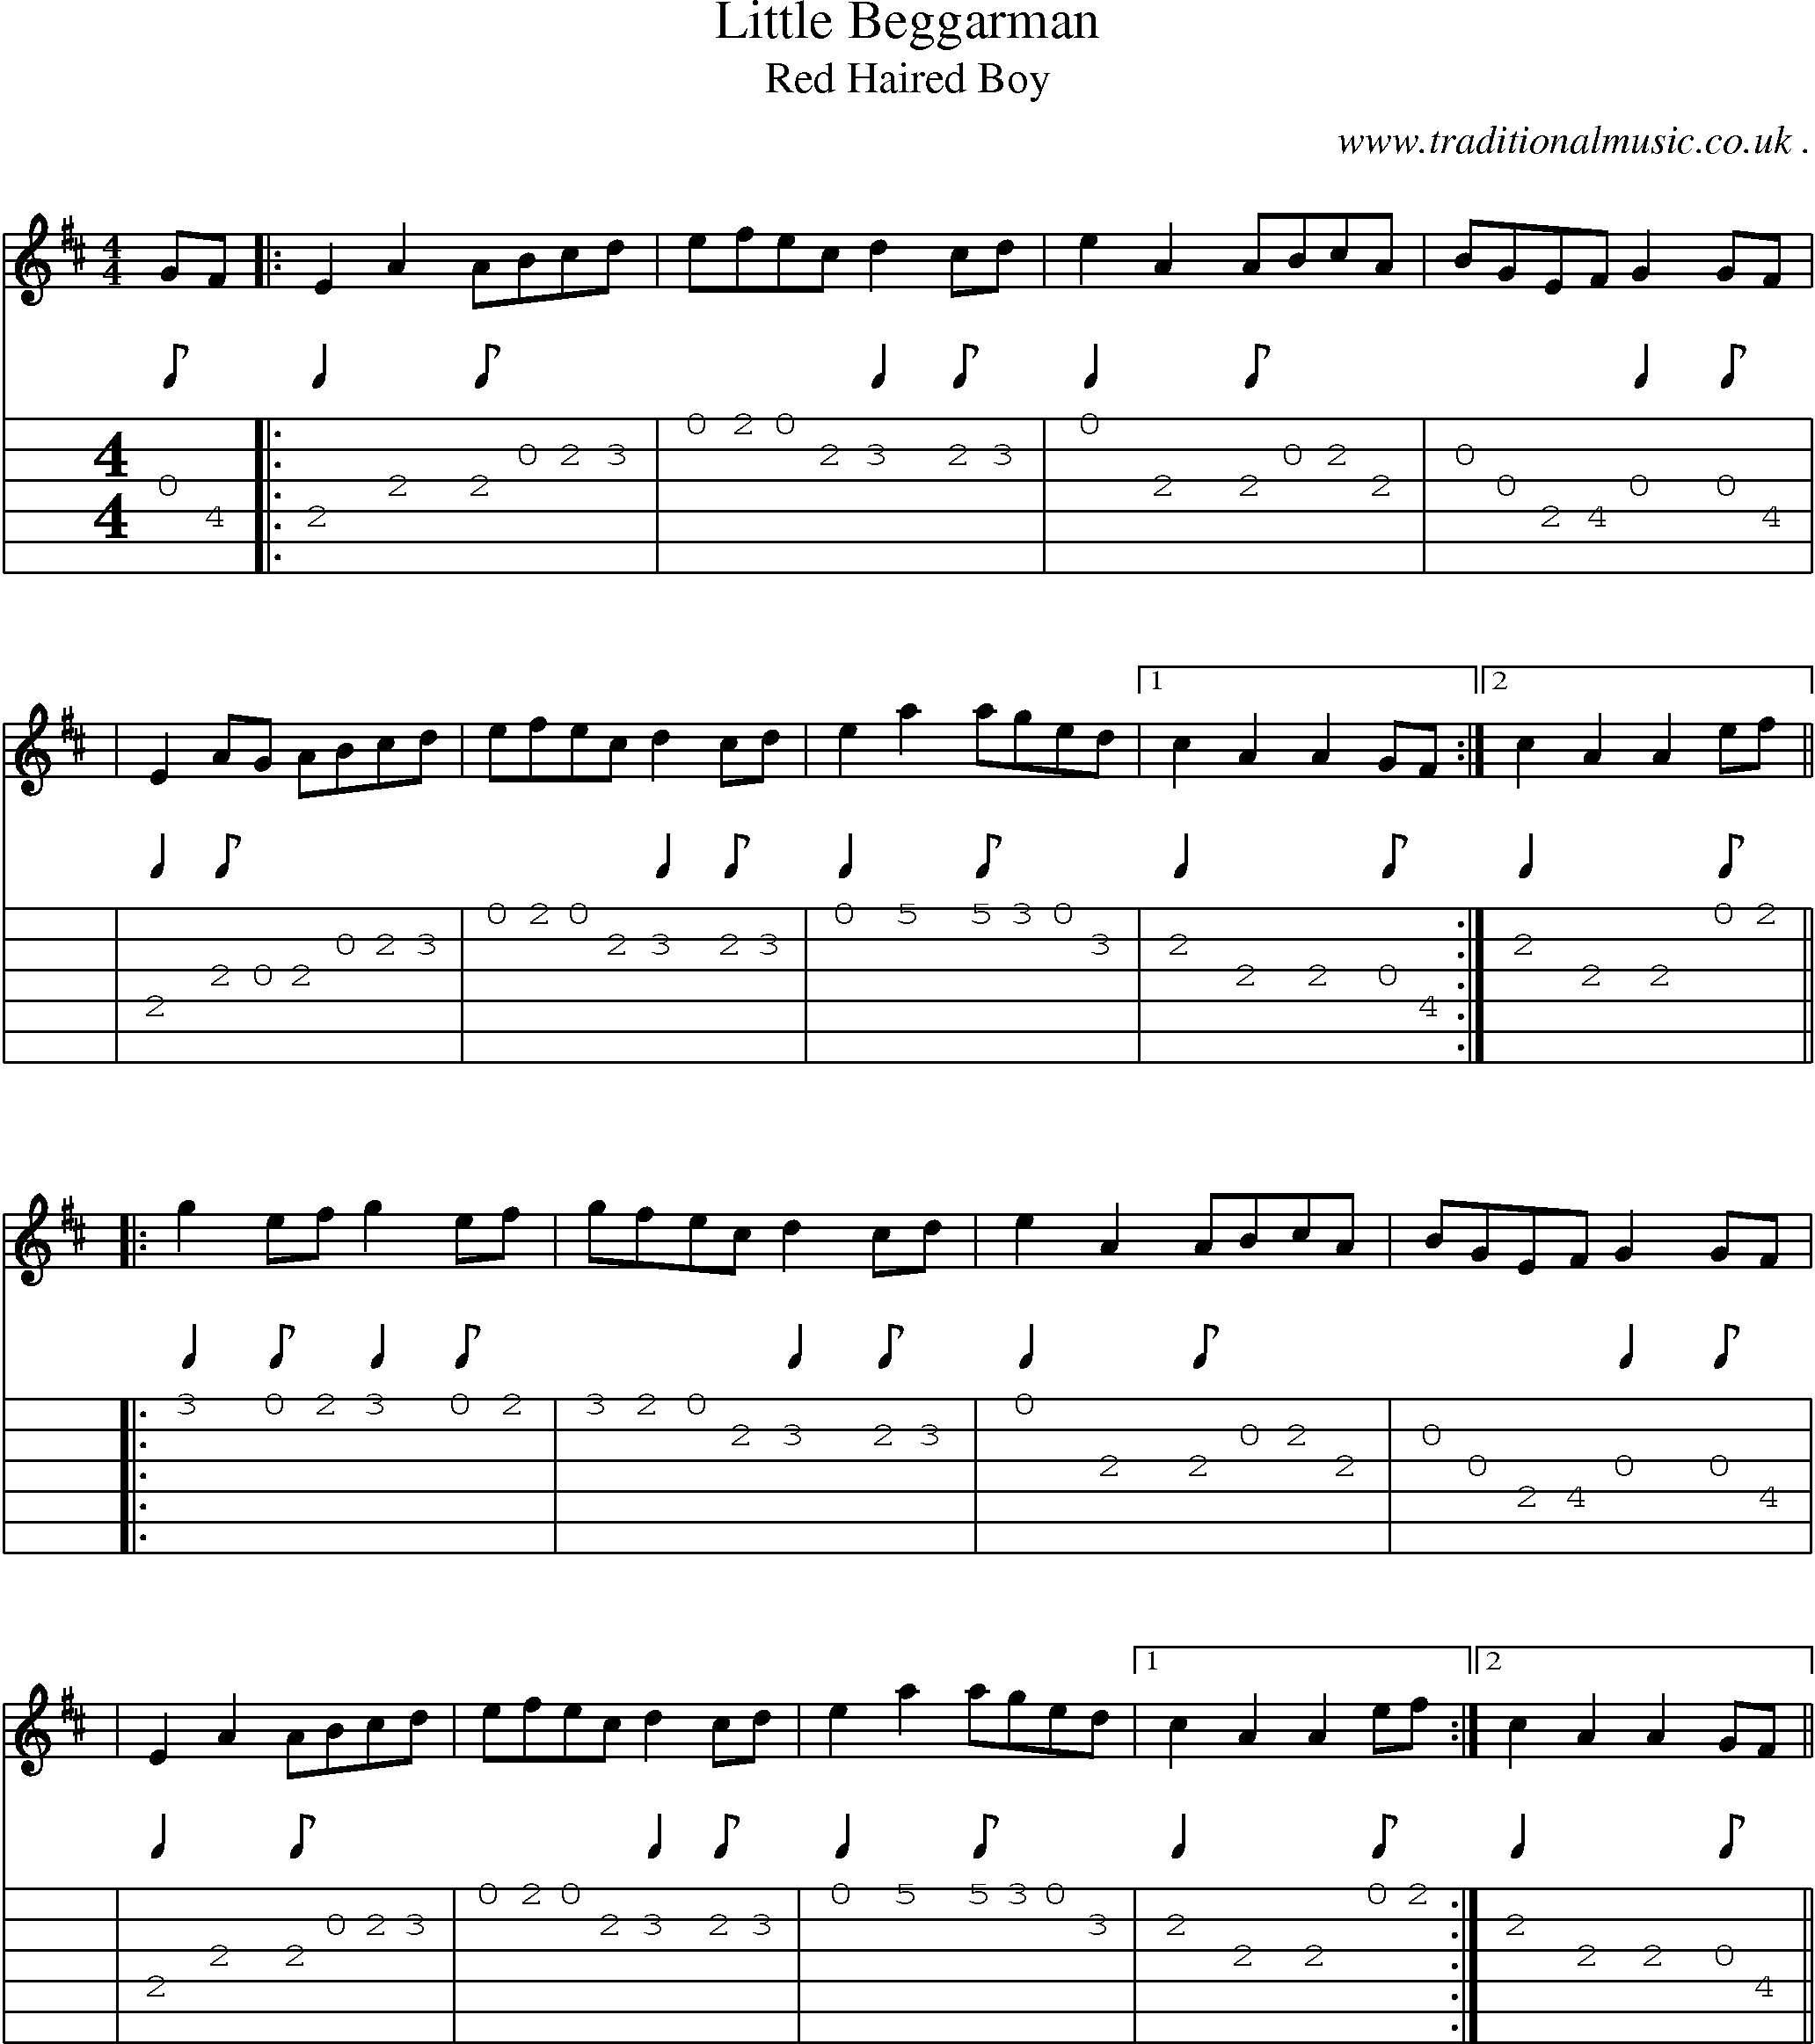 Sheet-Music and Guitar Tabs for Little Beggarman